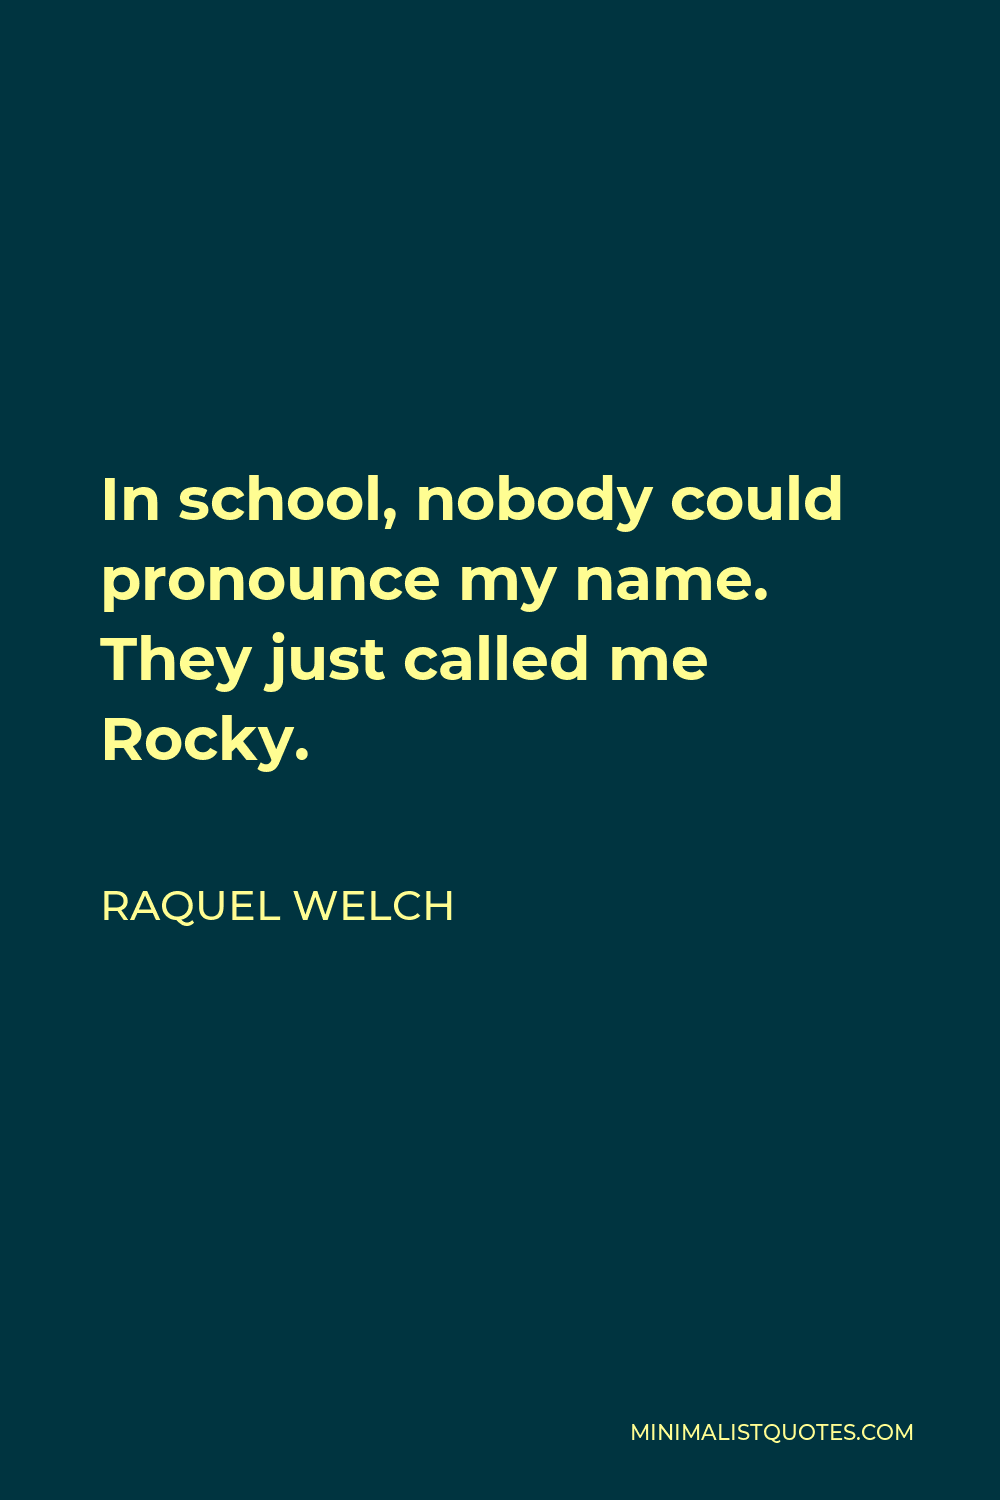 Raquel Welch Quote - In school, nobody could pronounce my name. They just called me Rocky.